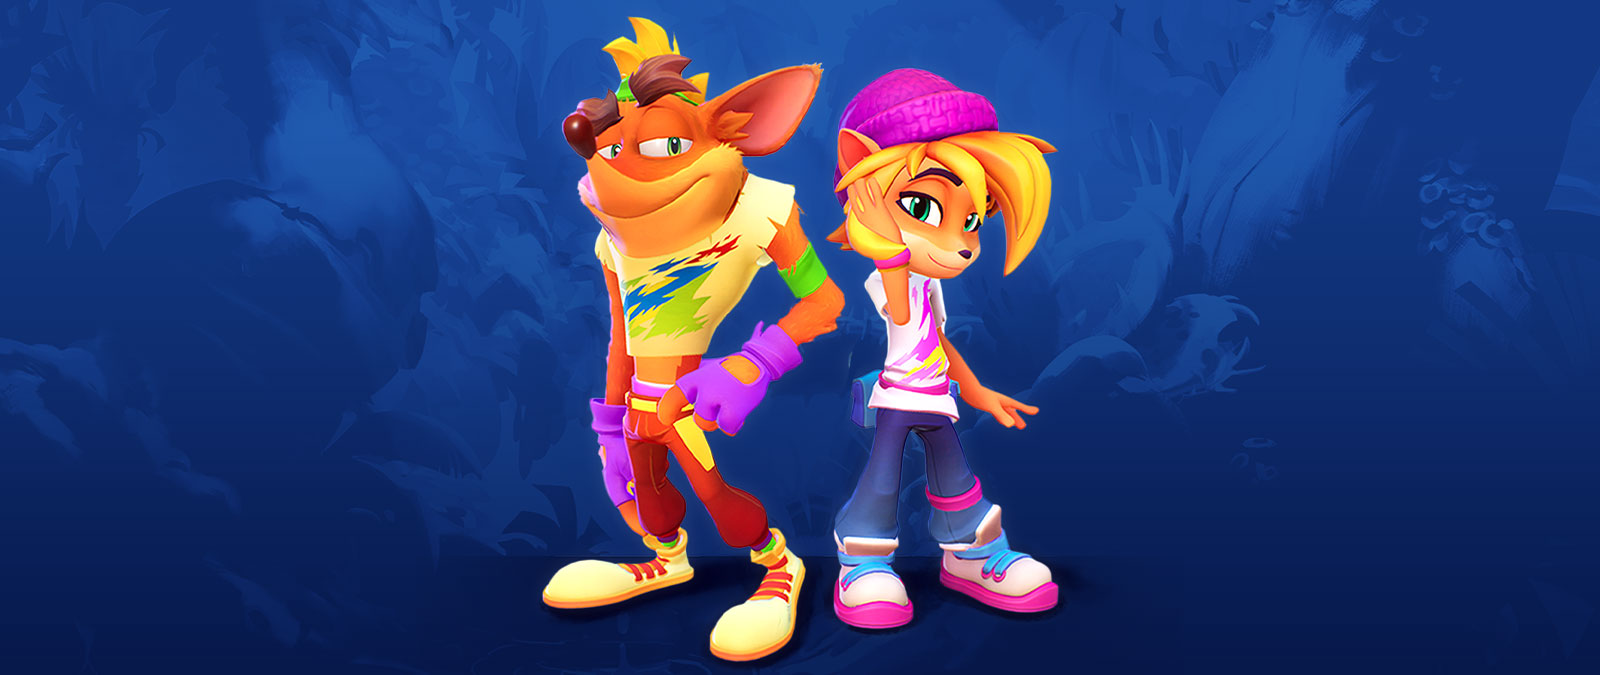 Crash and Coco stand in neon clothing. 